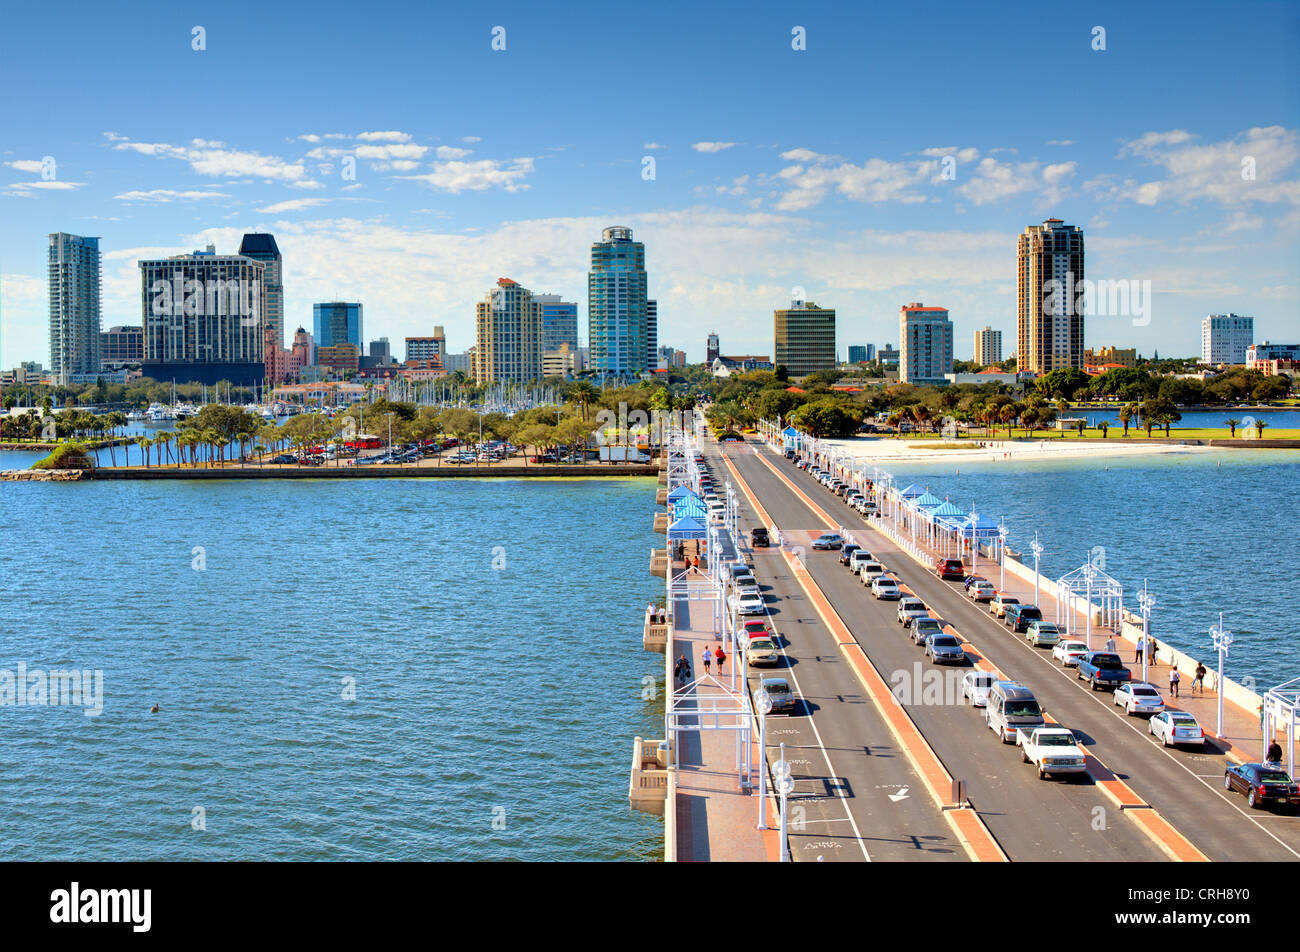 Skyline of St. Petersburg, Florida from the Pier. Stock Photo